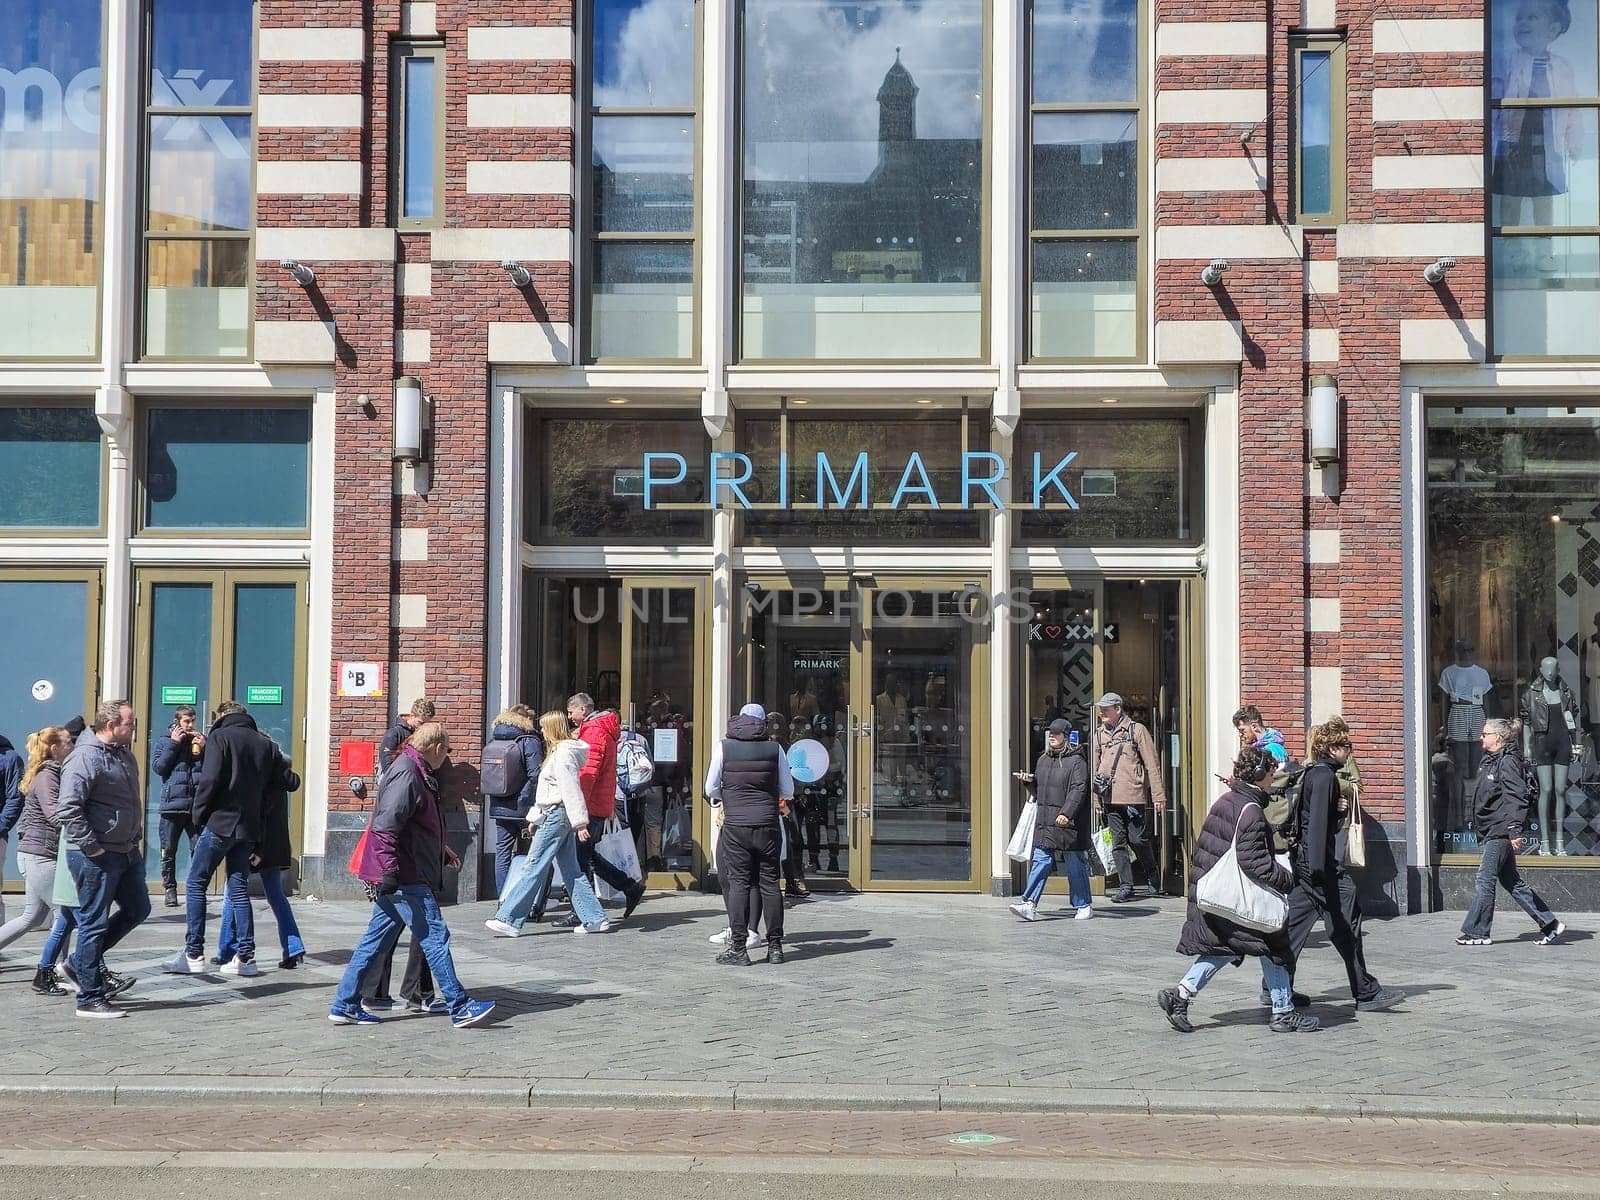 A diverse group of individuals leisurely walk past a Primark shop, each lost in their own thoughts, absorbing the grandeur and history of their surroundings by fokkebok